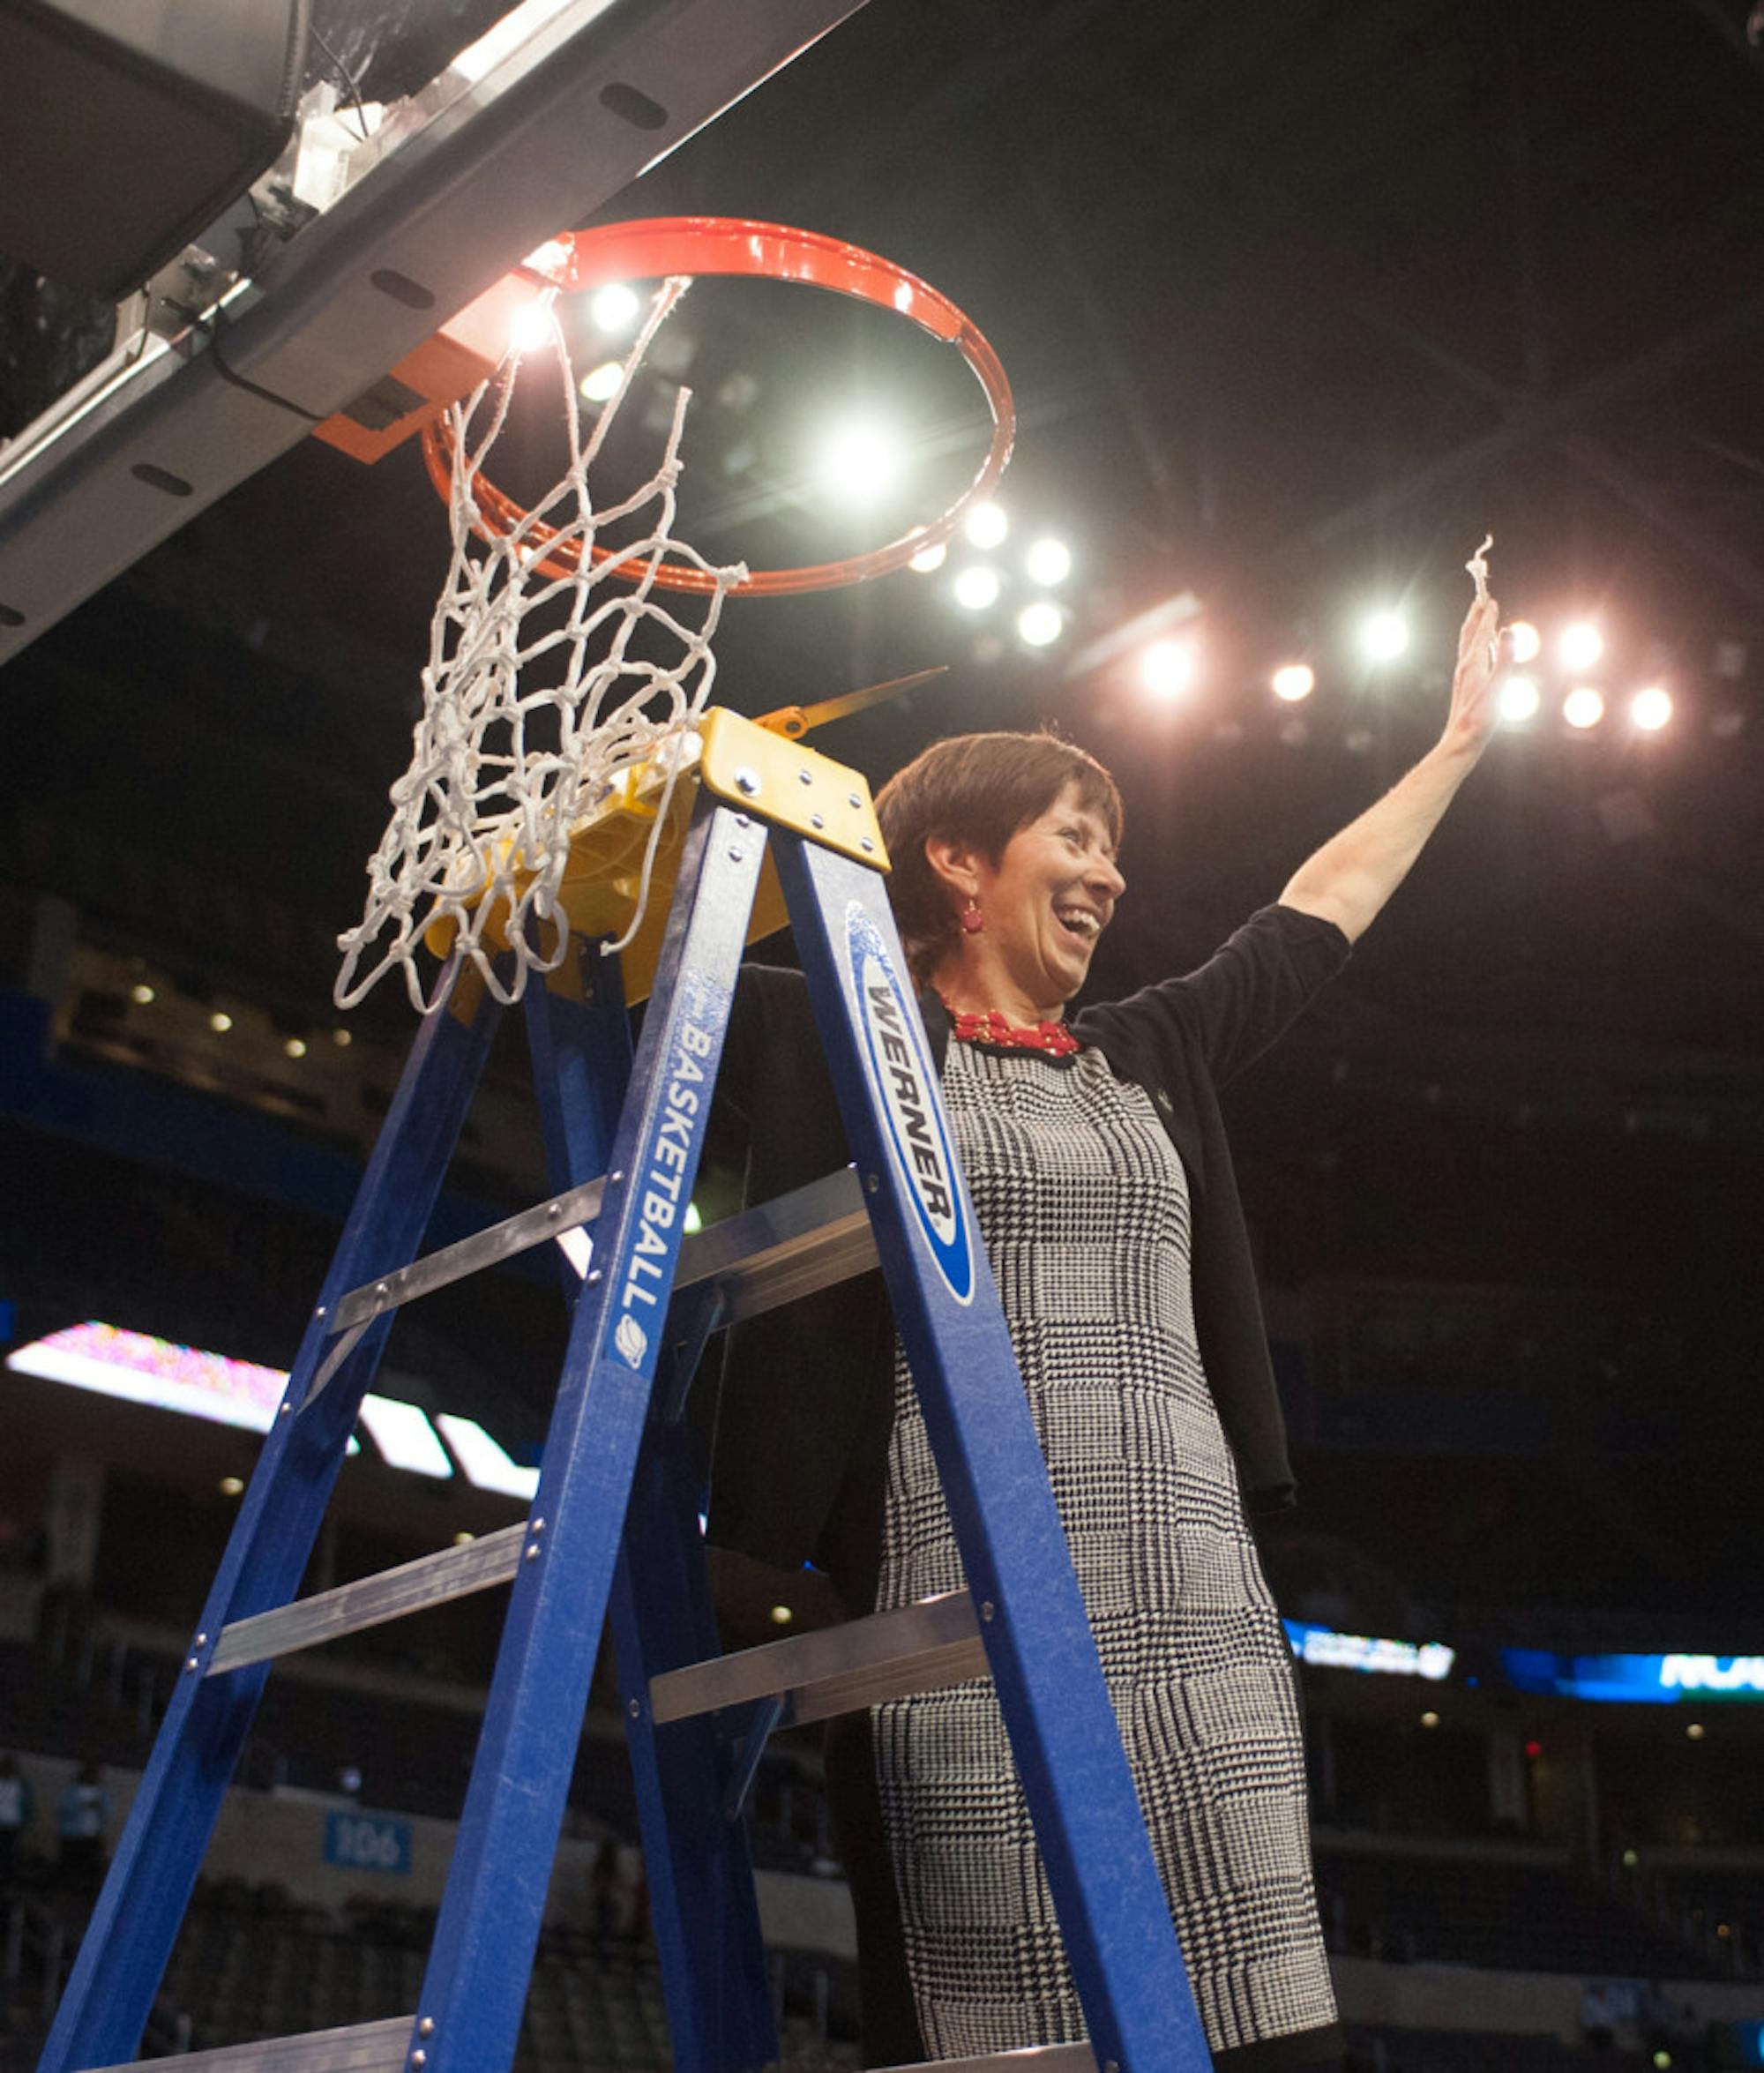 Irish head coach Muffet McGraw cuts down the net after her team defeated Baylor 77-68 in the Elite Eight on March 29, 2015 at Chesapeake Energy Arena in Oklahoma City. McGraw has 853 career wins.